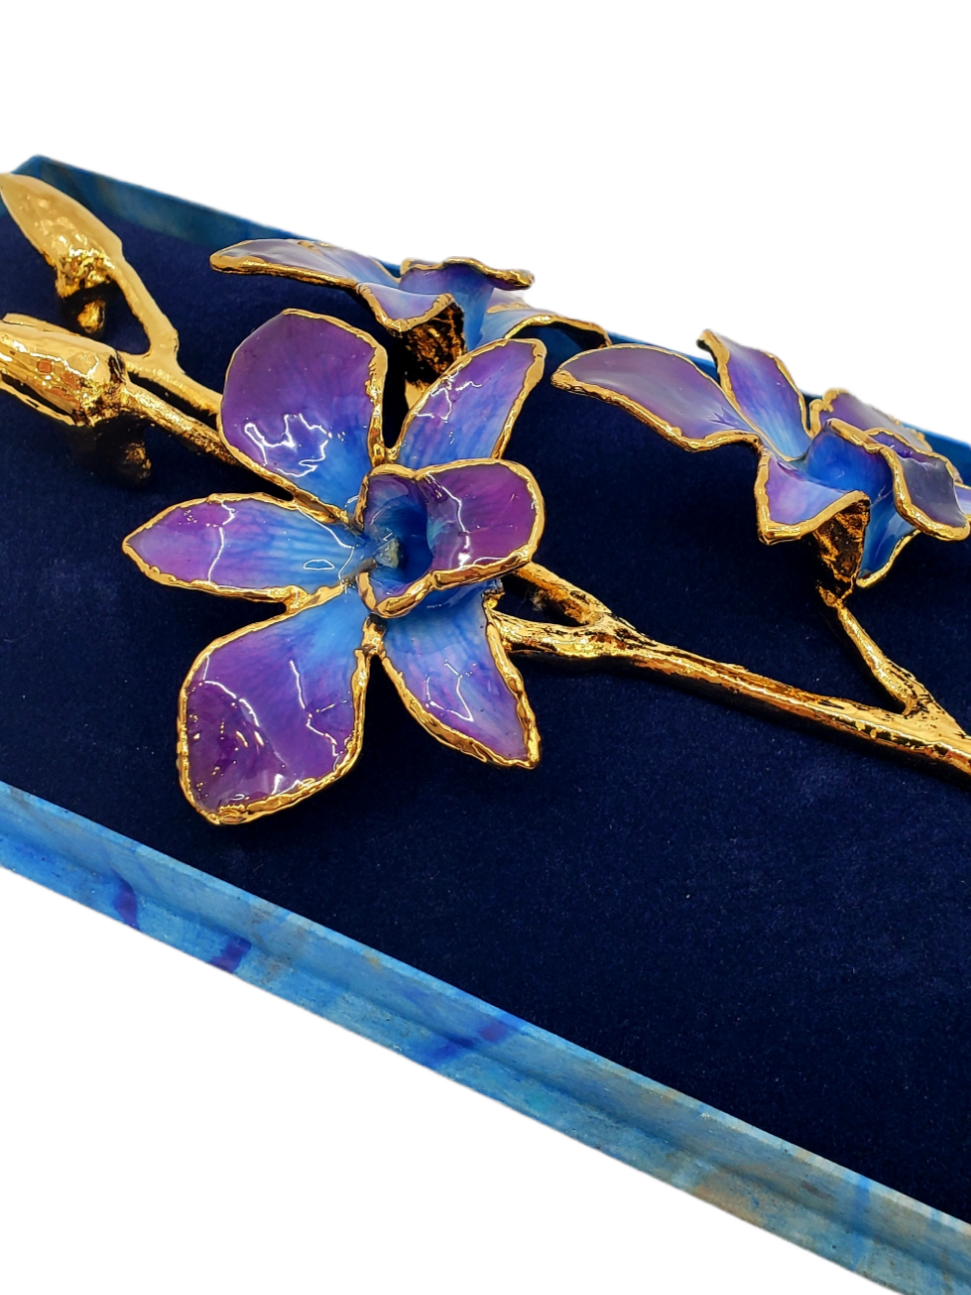 24K Gold Dipped Lacquered Genuine Purple and Blue Real Orchid Stem